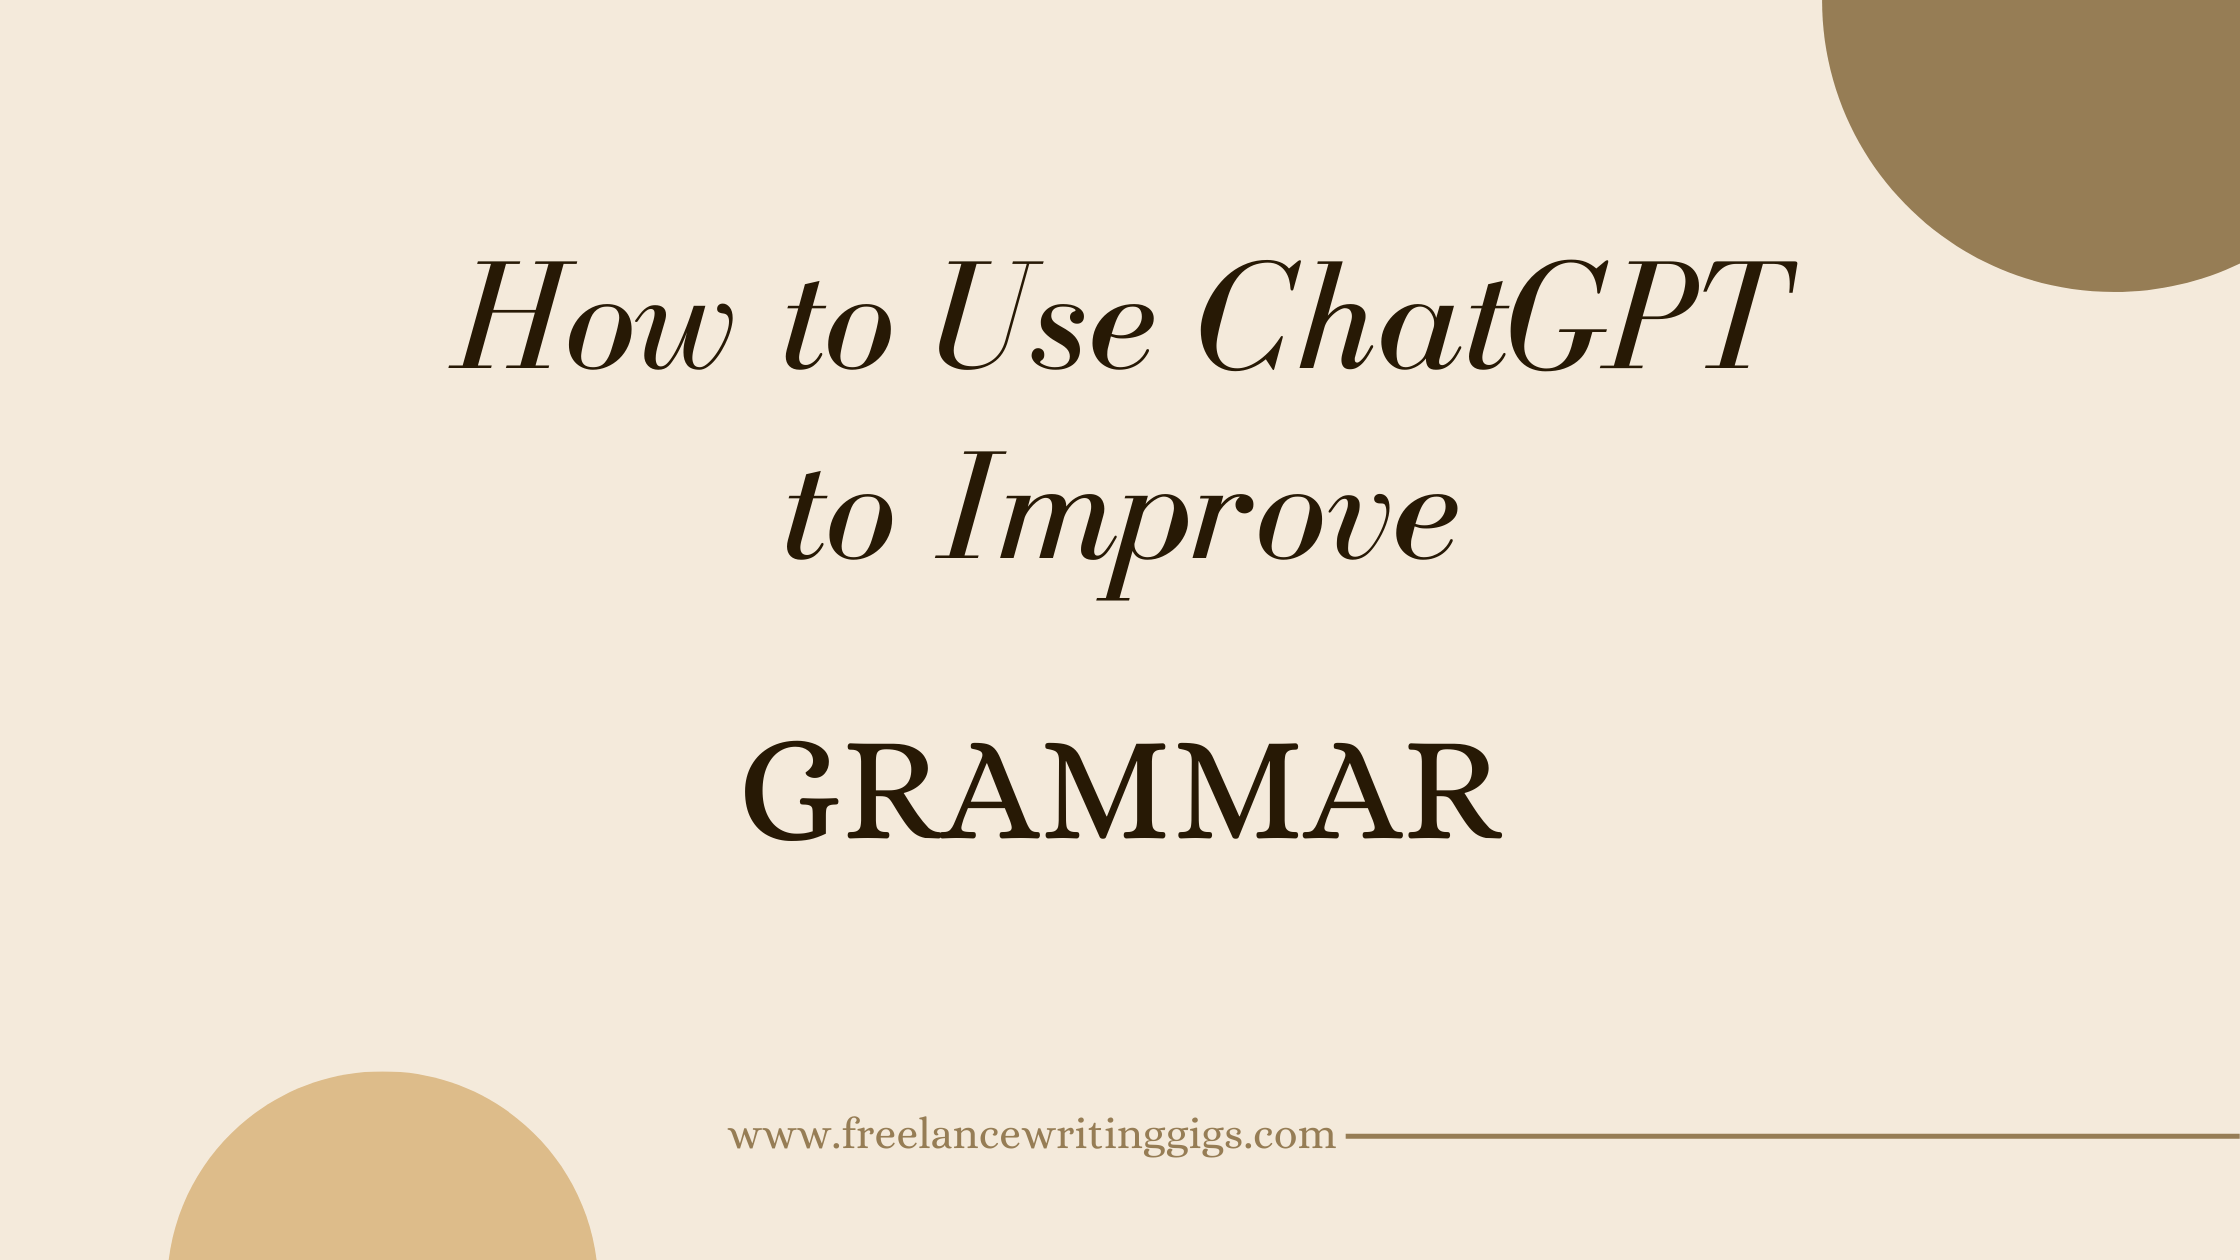 How to Use ChatGPT to Improve Grammar